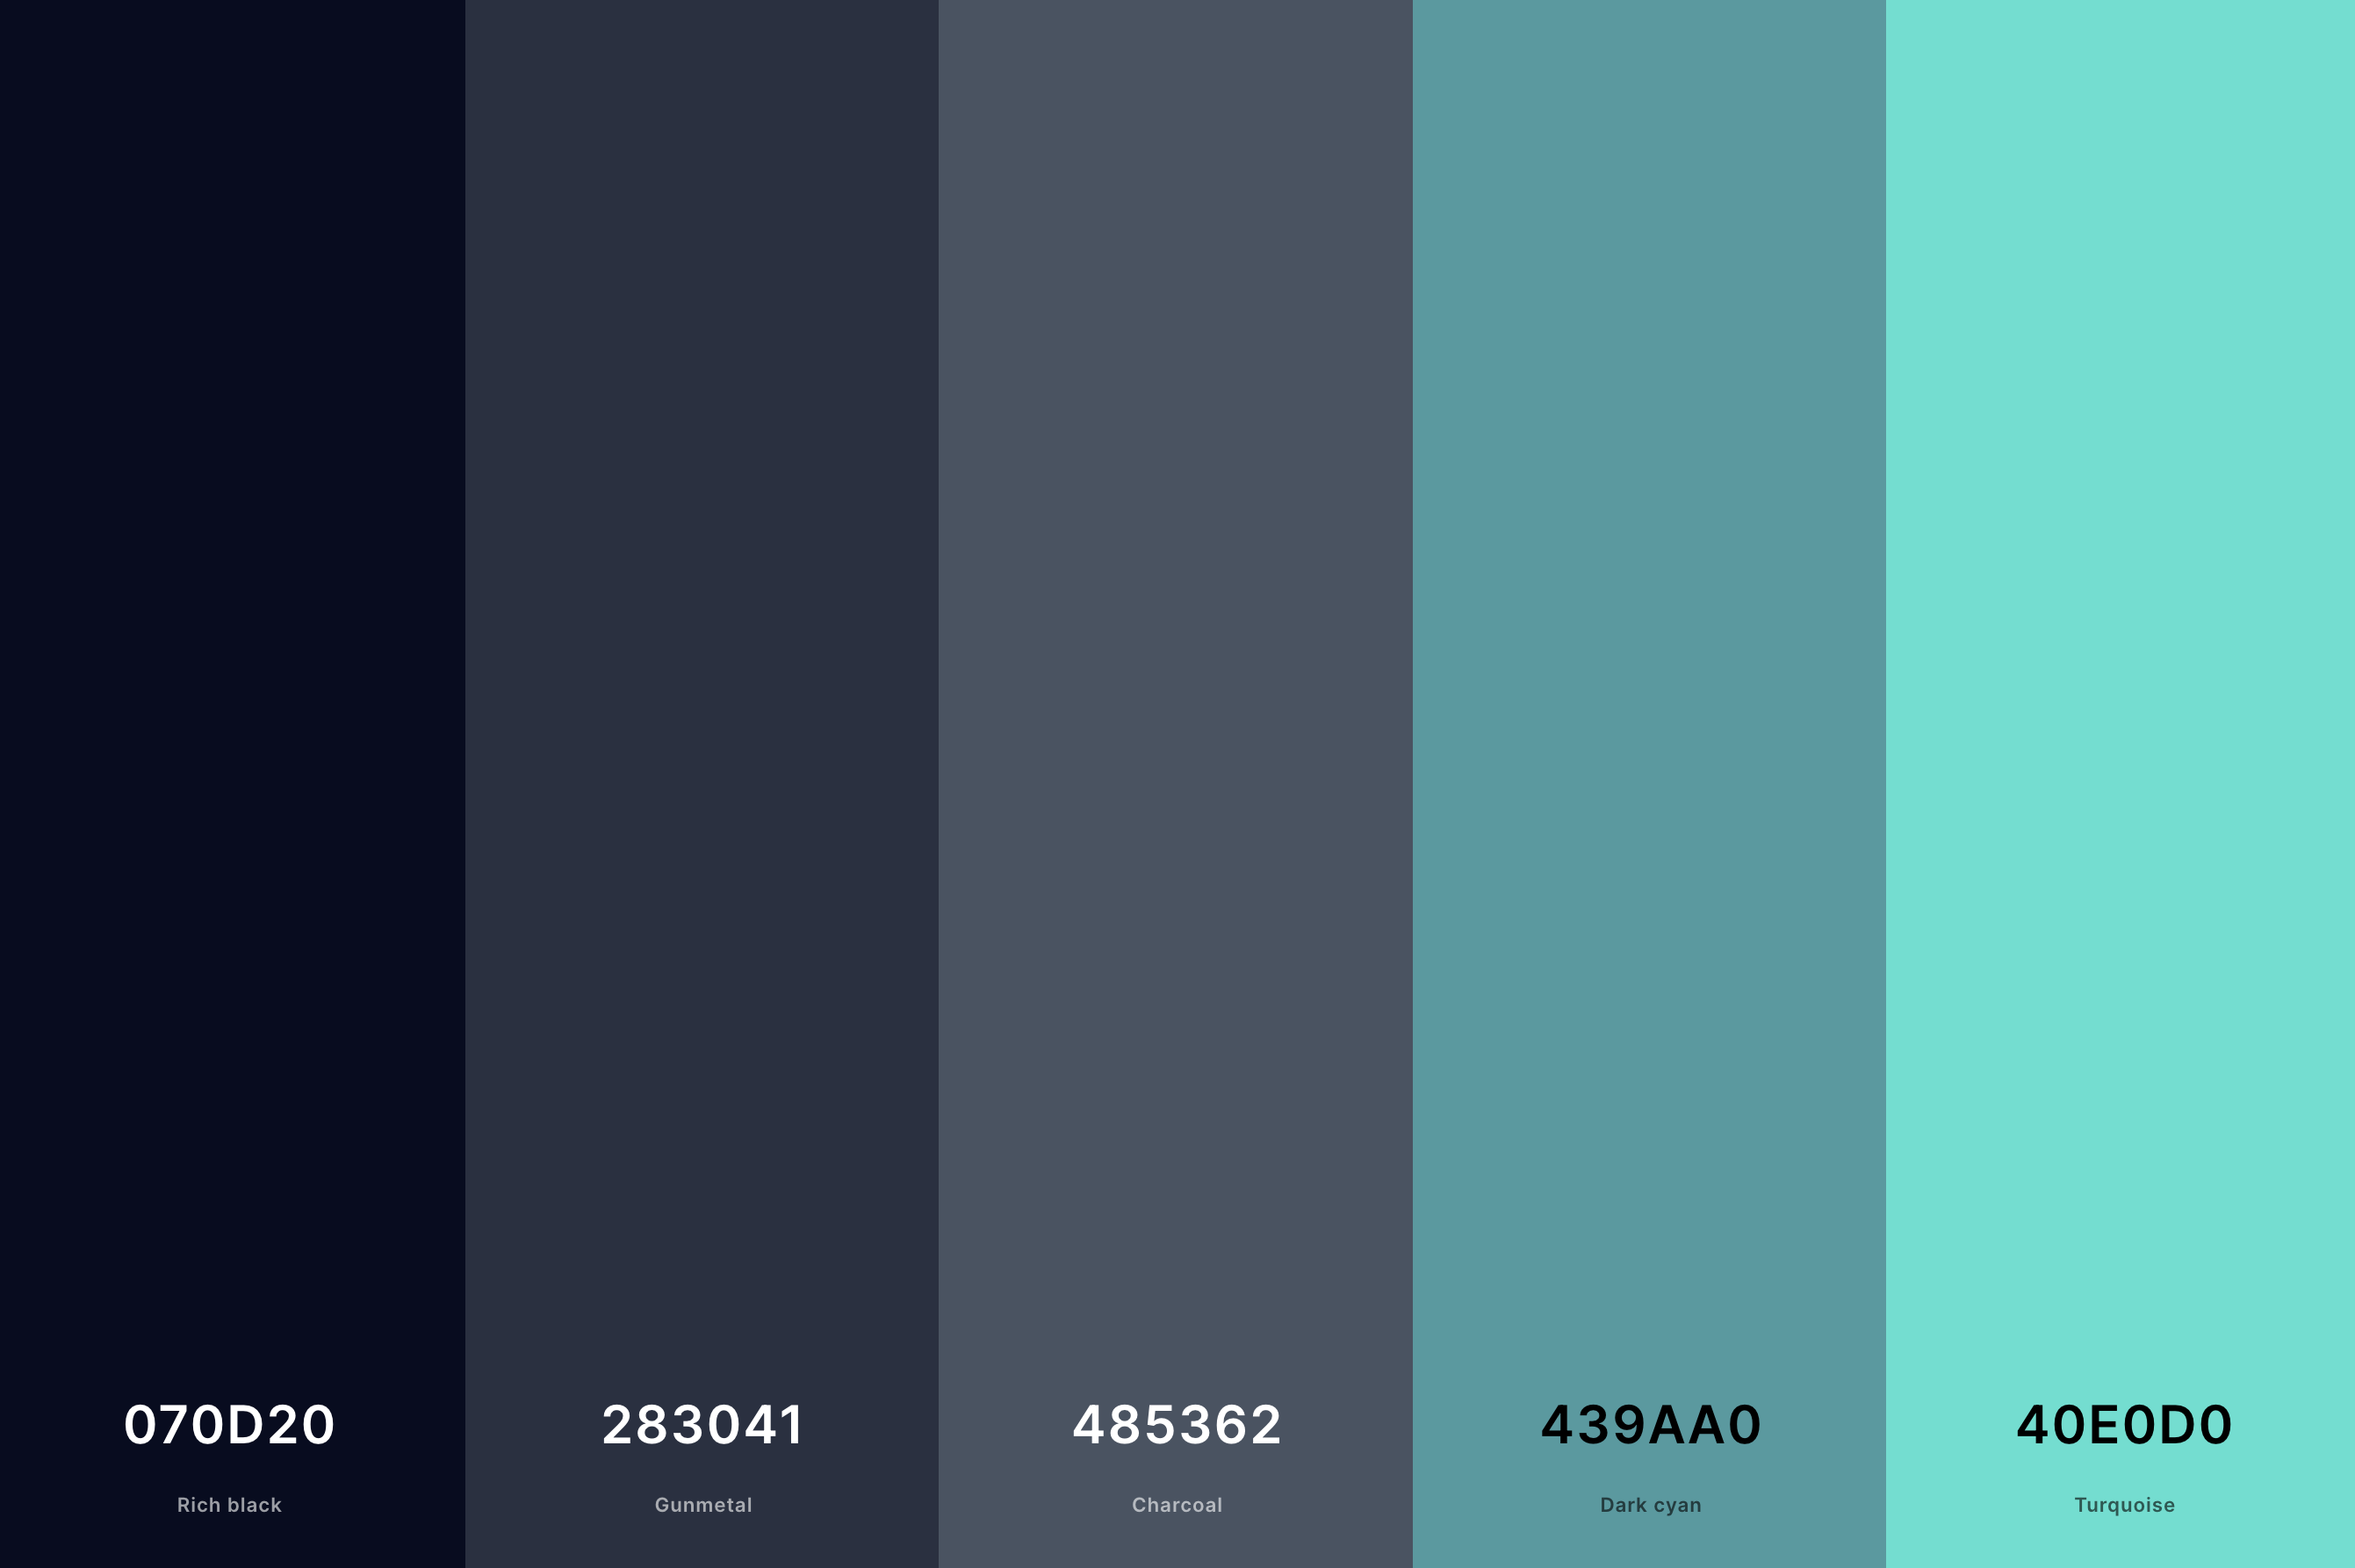 6. Black And Turquoise Color Palette Color Palette with Rich Black (Hex #070D20) + Gunmetal (Hex #283041) + Charcoal (Hex #485362) + Dark Cyan (Hex #439AA0) + Turquoise (Hex #40E0D0) Color Palette with Hex Codes